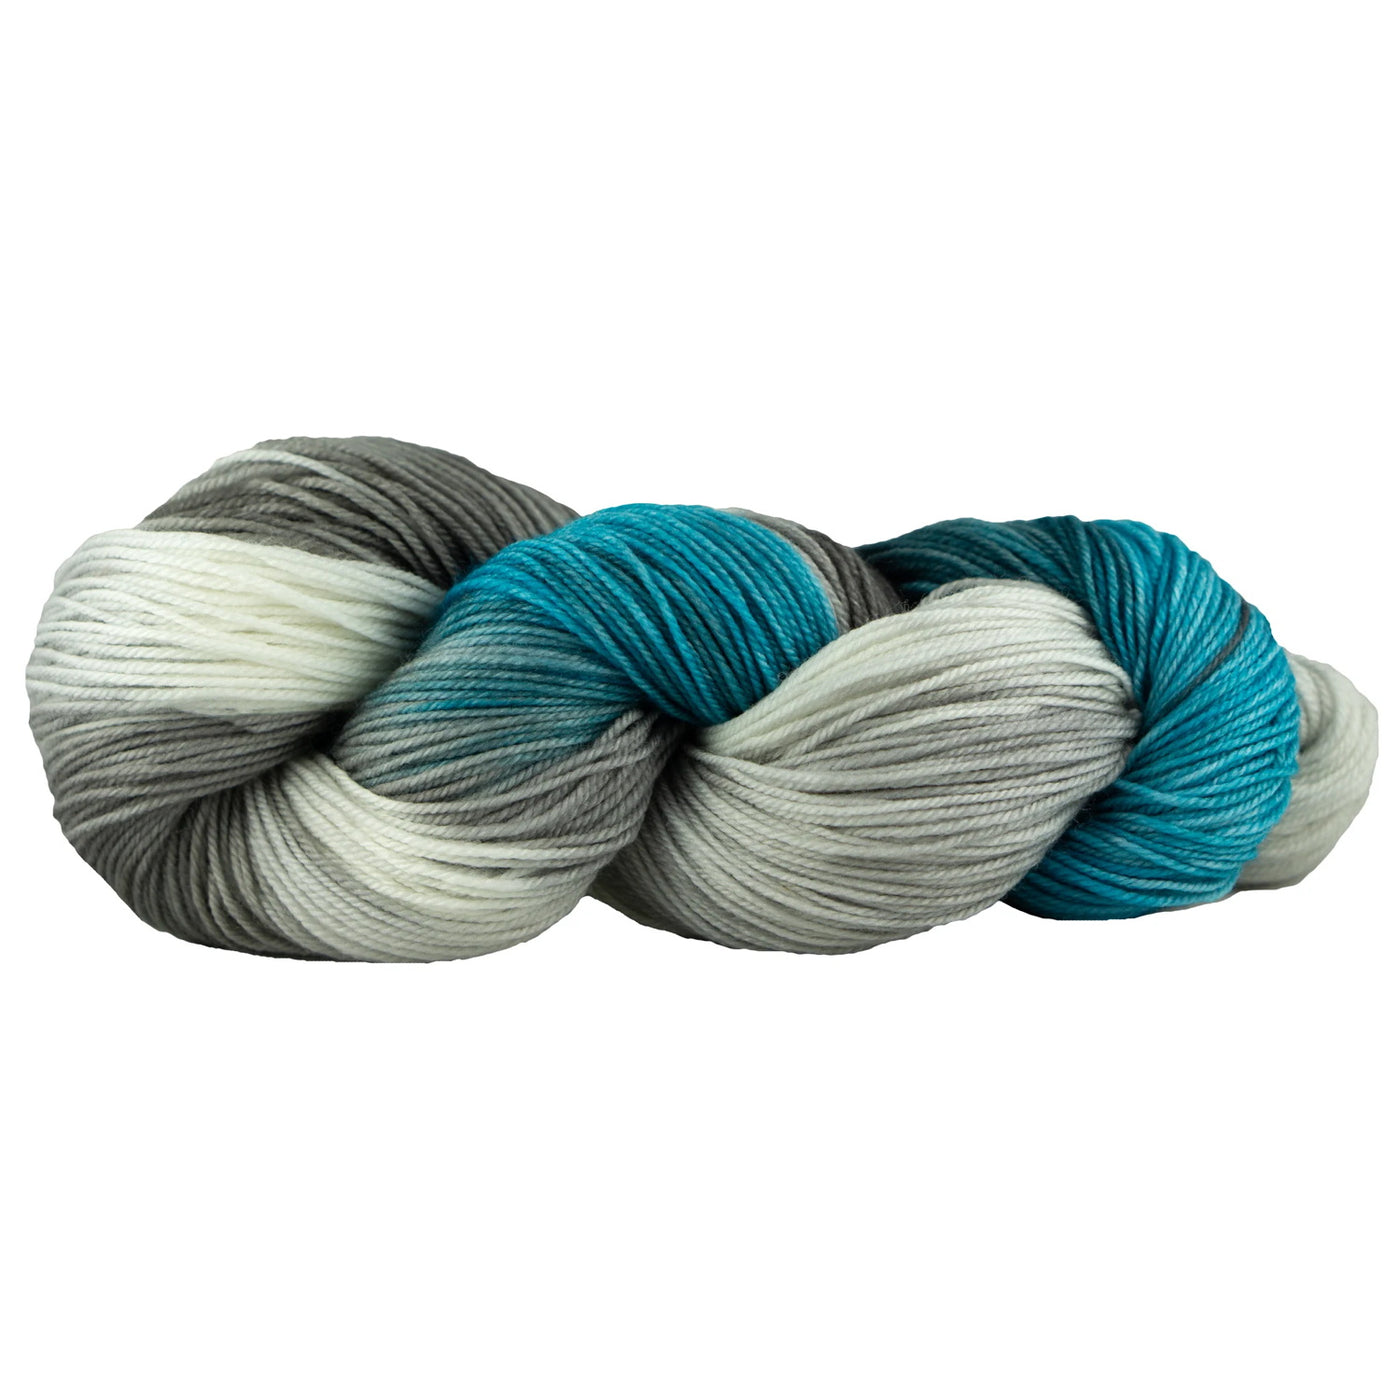 Alegria Space-dyed - Acero A8292